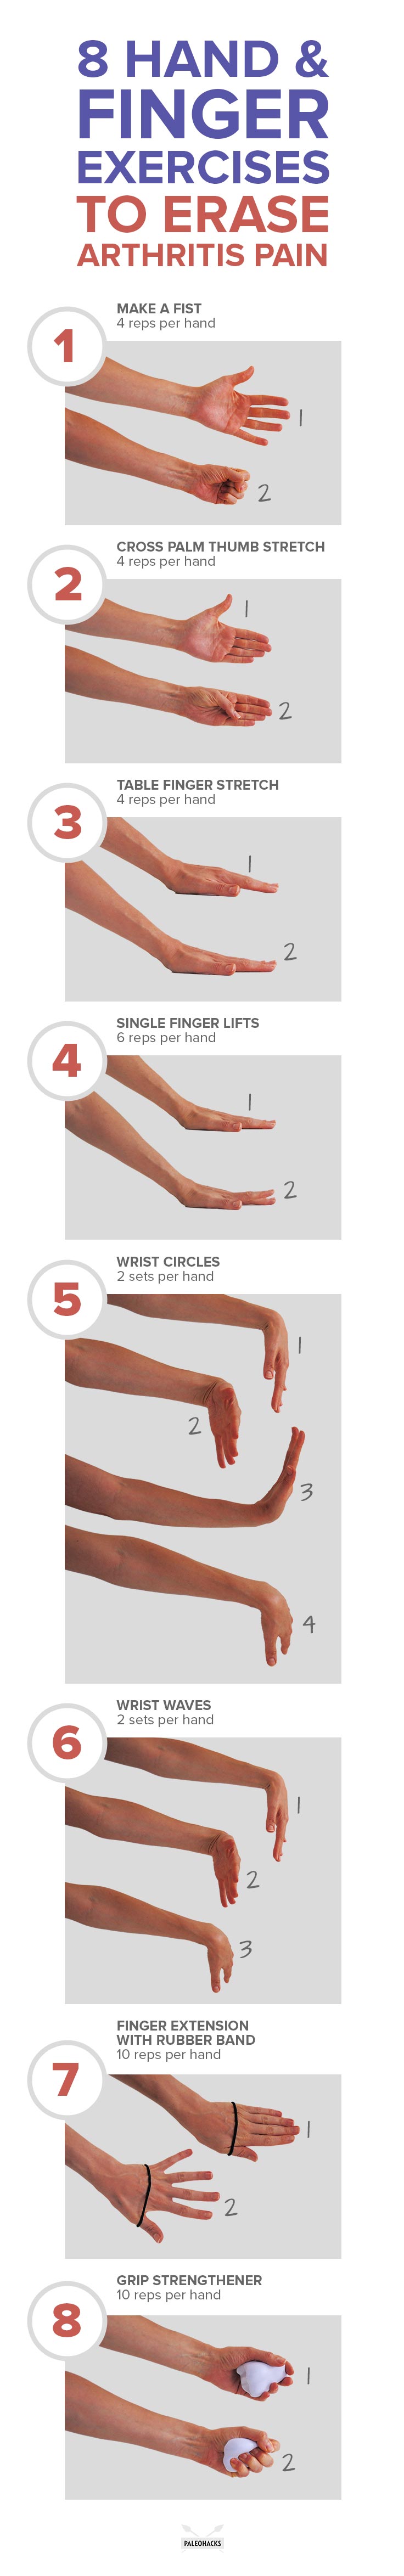 These eight hand exercises can alleviate symptoms like swelling in the finger joints, pain when moving the hands, and loss of dexterity, and grip strength.